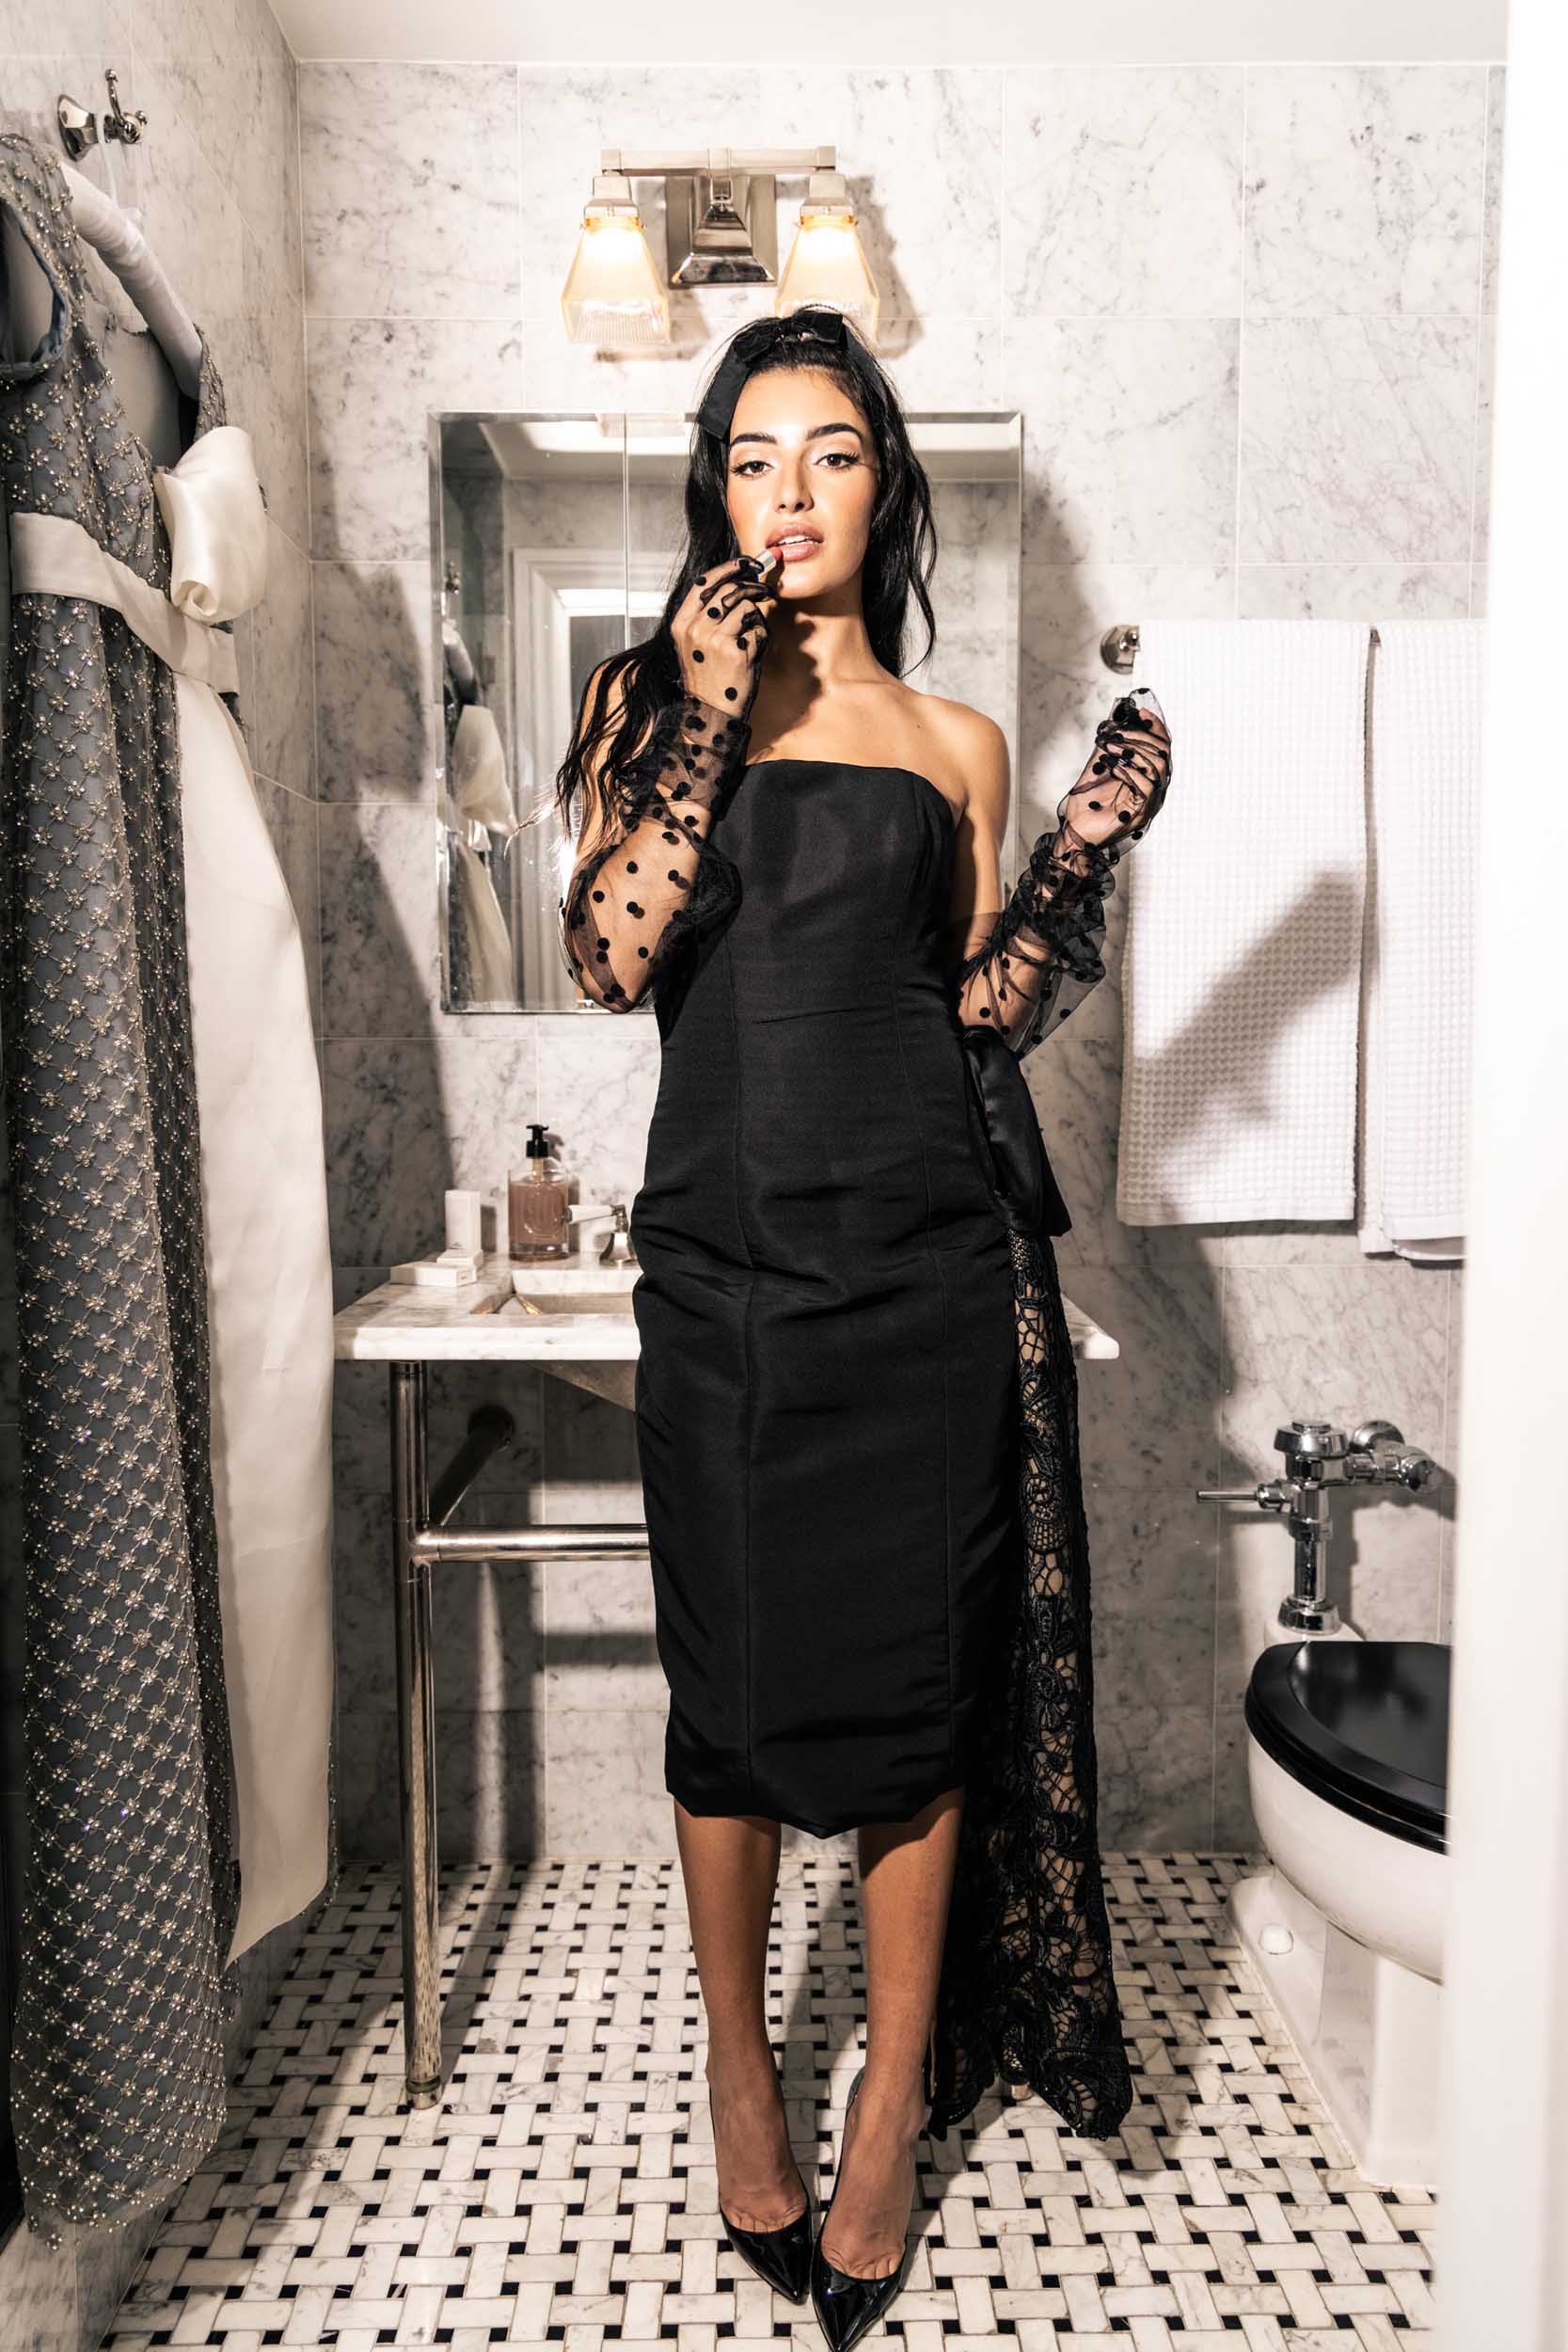 Gorgeous model in chic black embellished Sujata cocktail dress with elbow-length tulle gloves and a velvet bow in her hair putting on lipstick in a bathroom